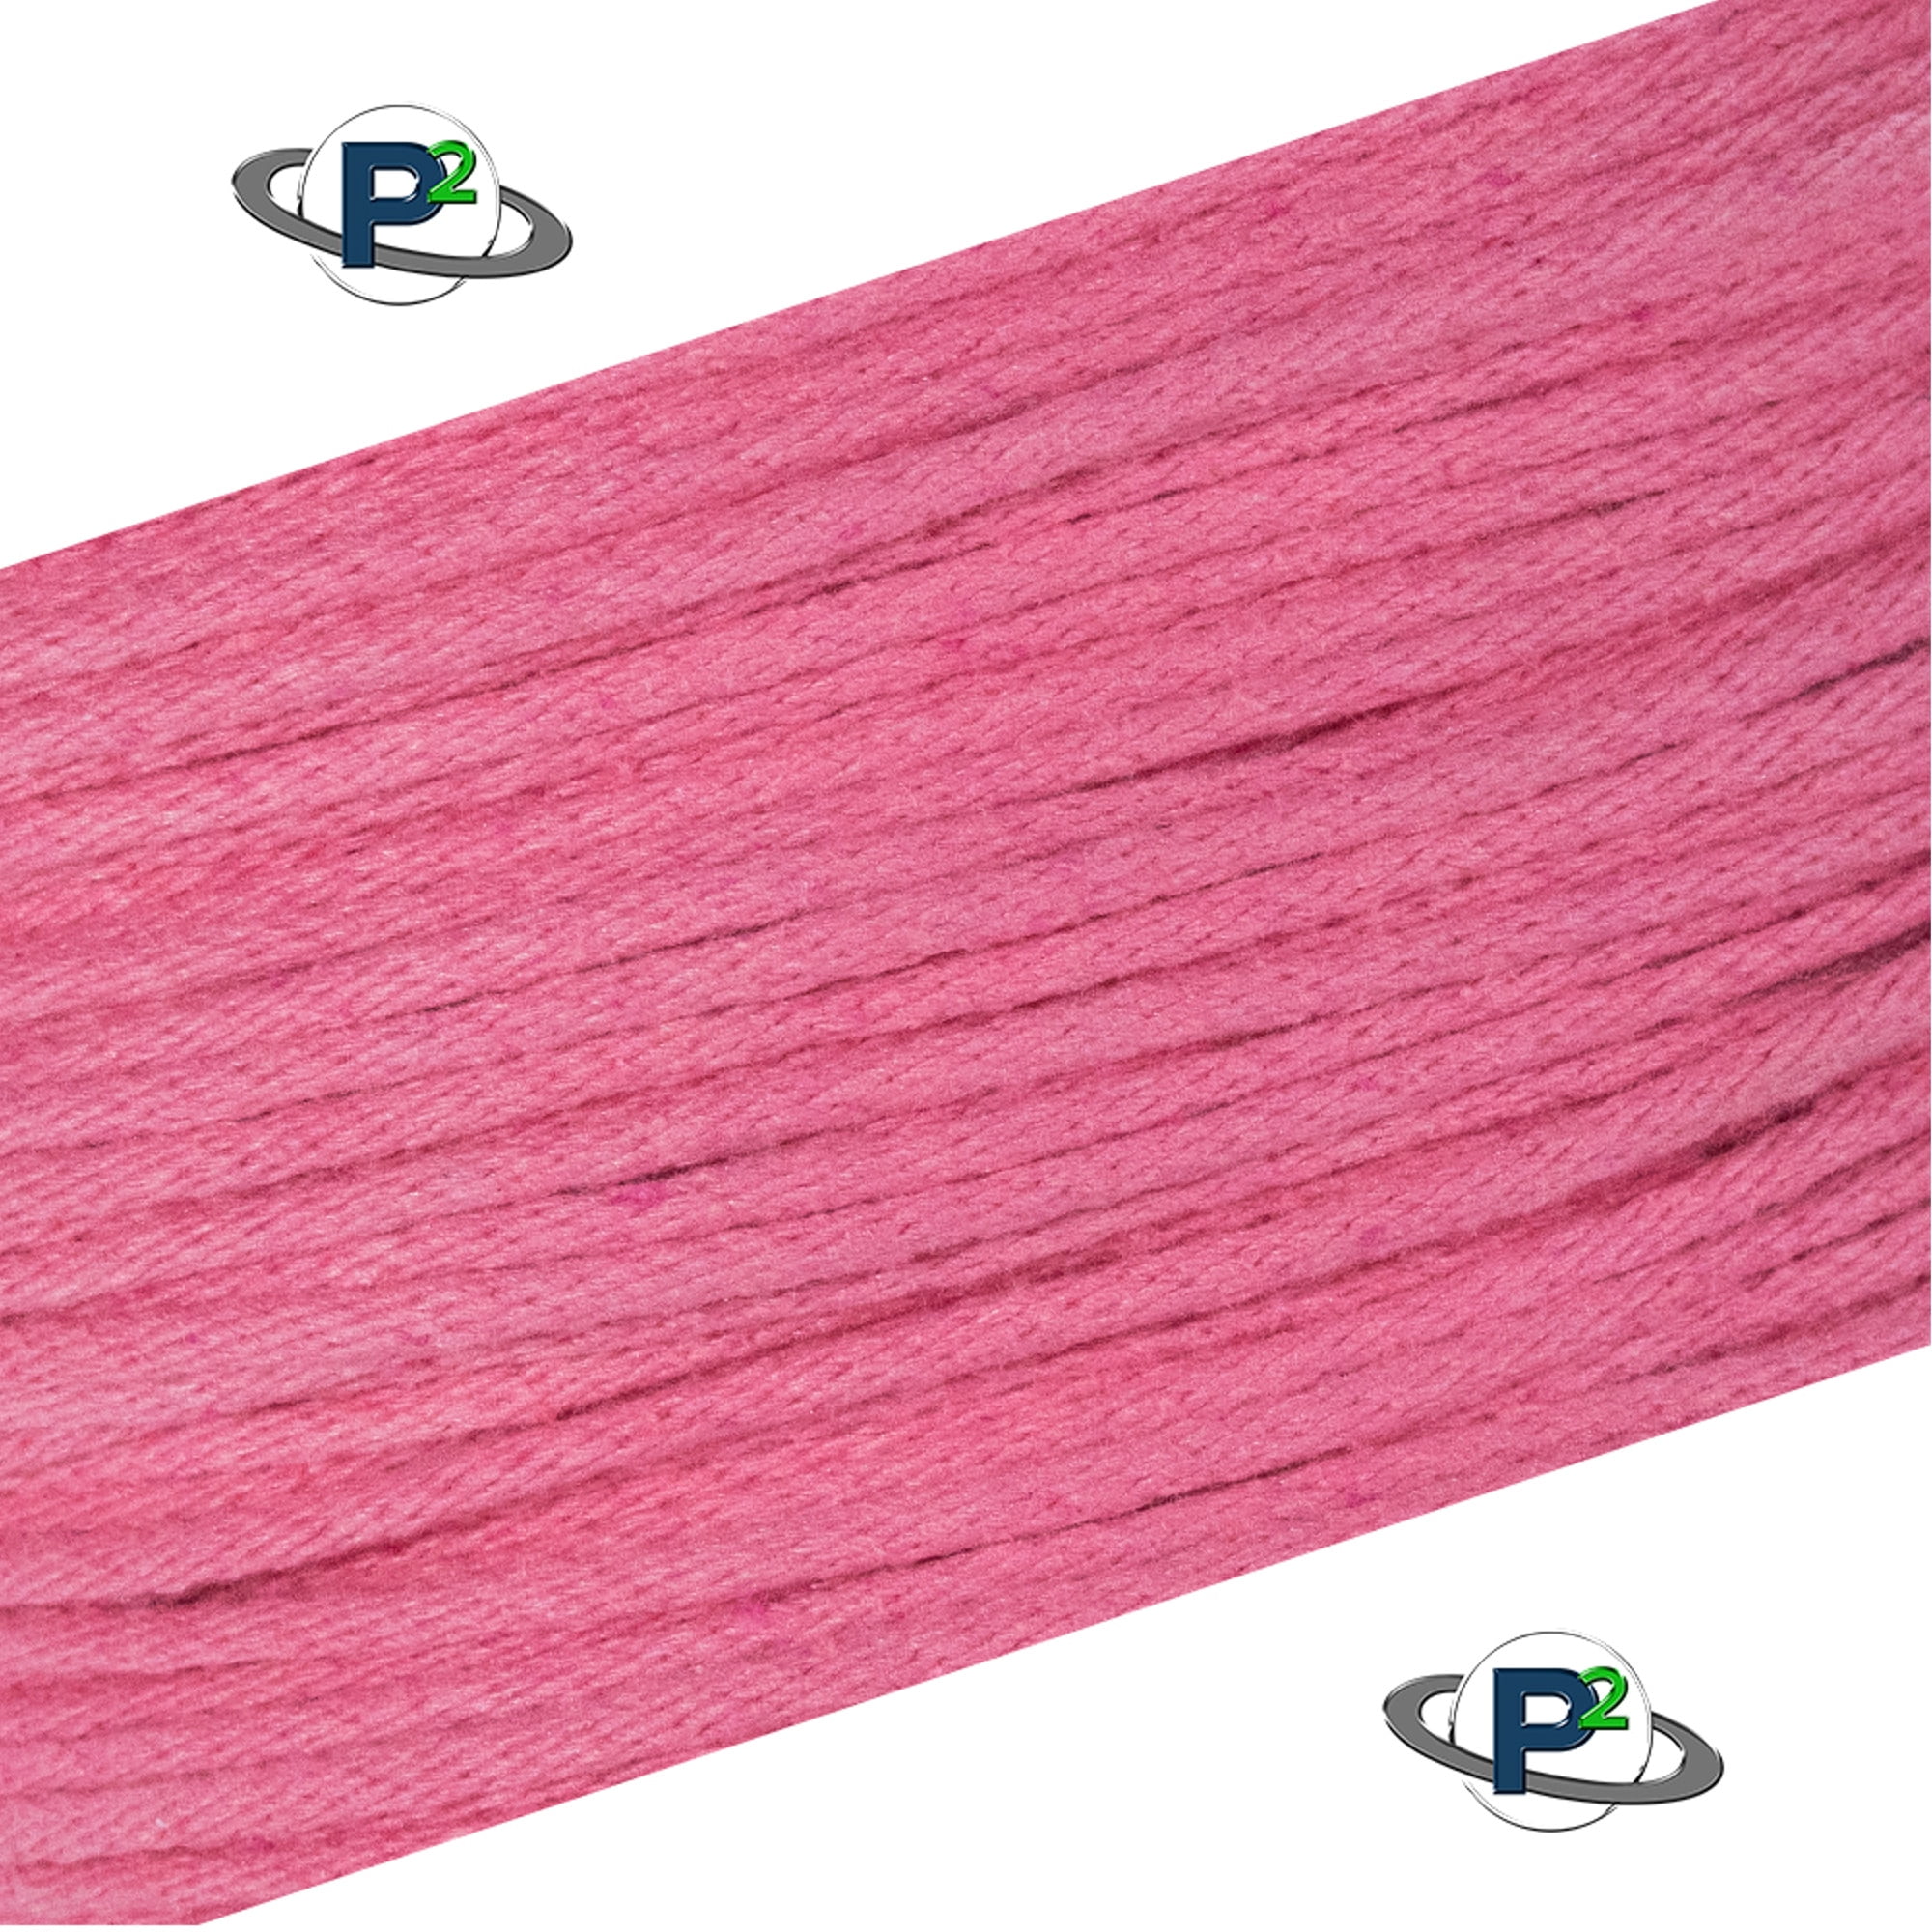 Sash Cord Available in Various Colors and 1/8 inch Sizes Paracord Planet Solid Braid Poly Cotton Rope 3/8 3/16 1/2 1/4 